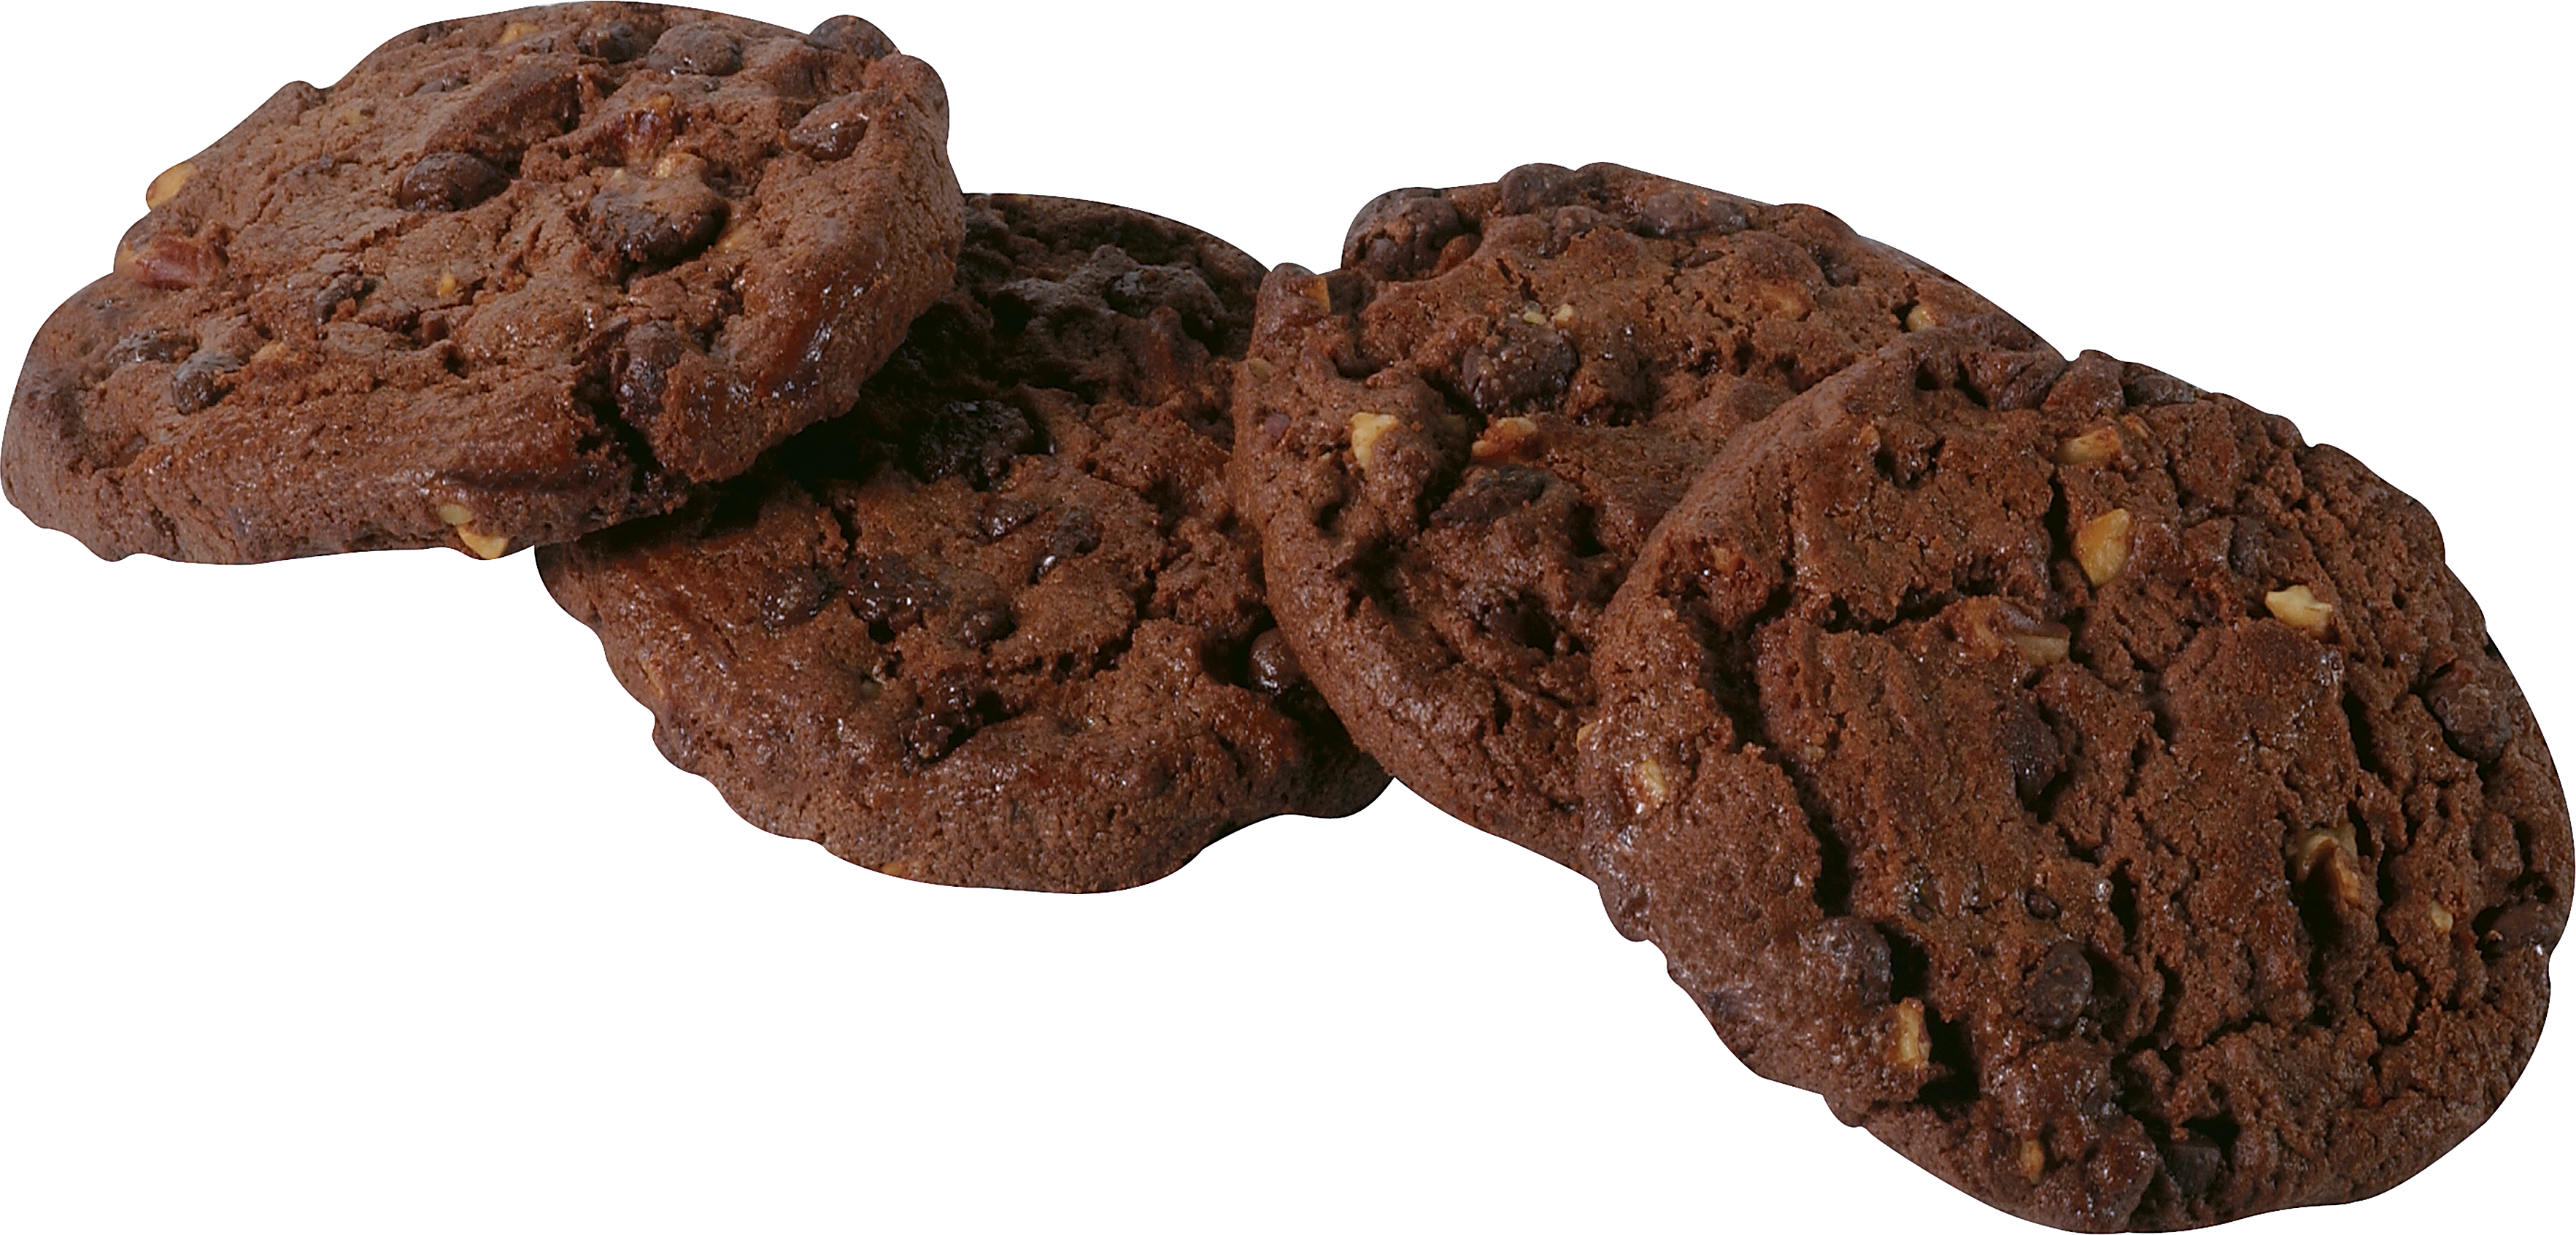 A Group Of Chocolate Chip Cookies